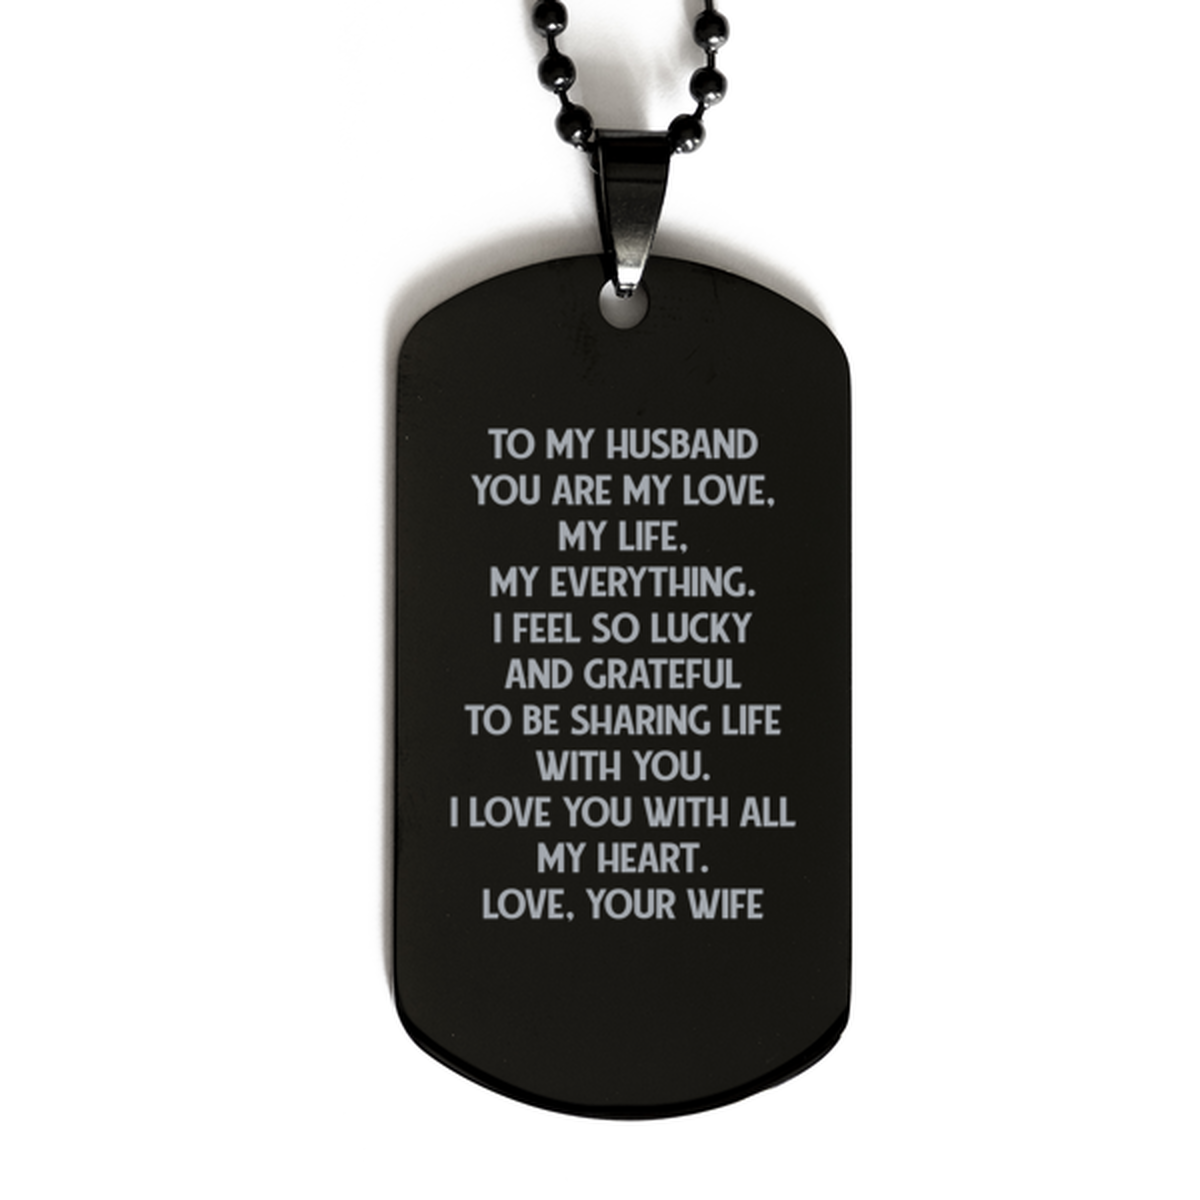 To My Husband Black Dog Tag, I Love You With All My Heart, Anniversary Gifts For Husband From Wife, Birthday Gifts For Men